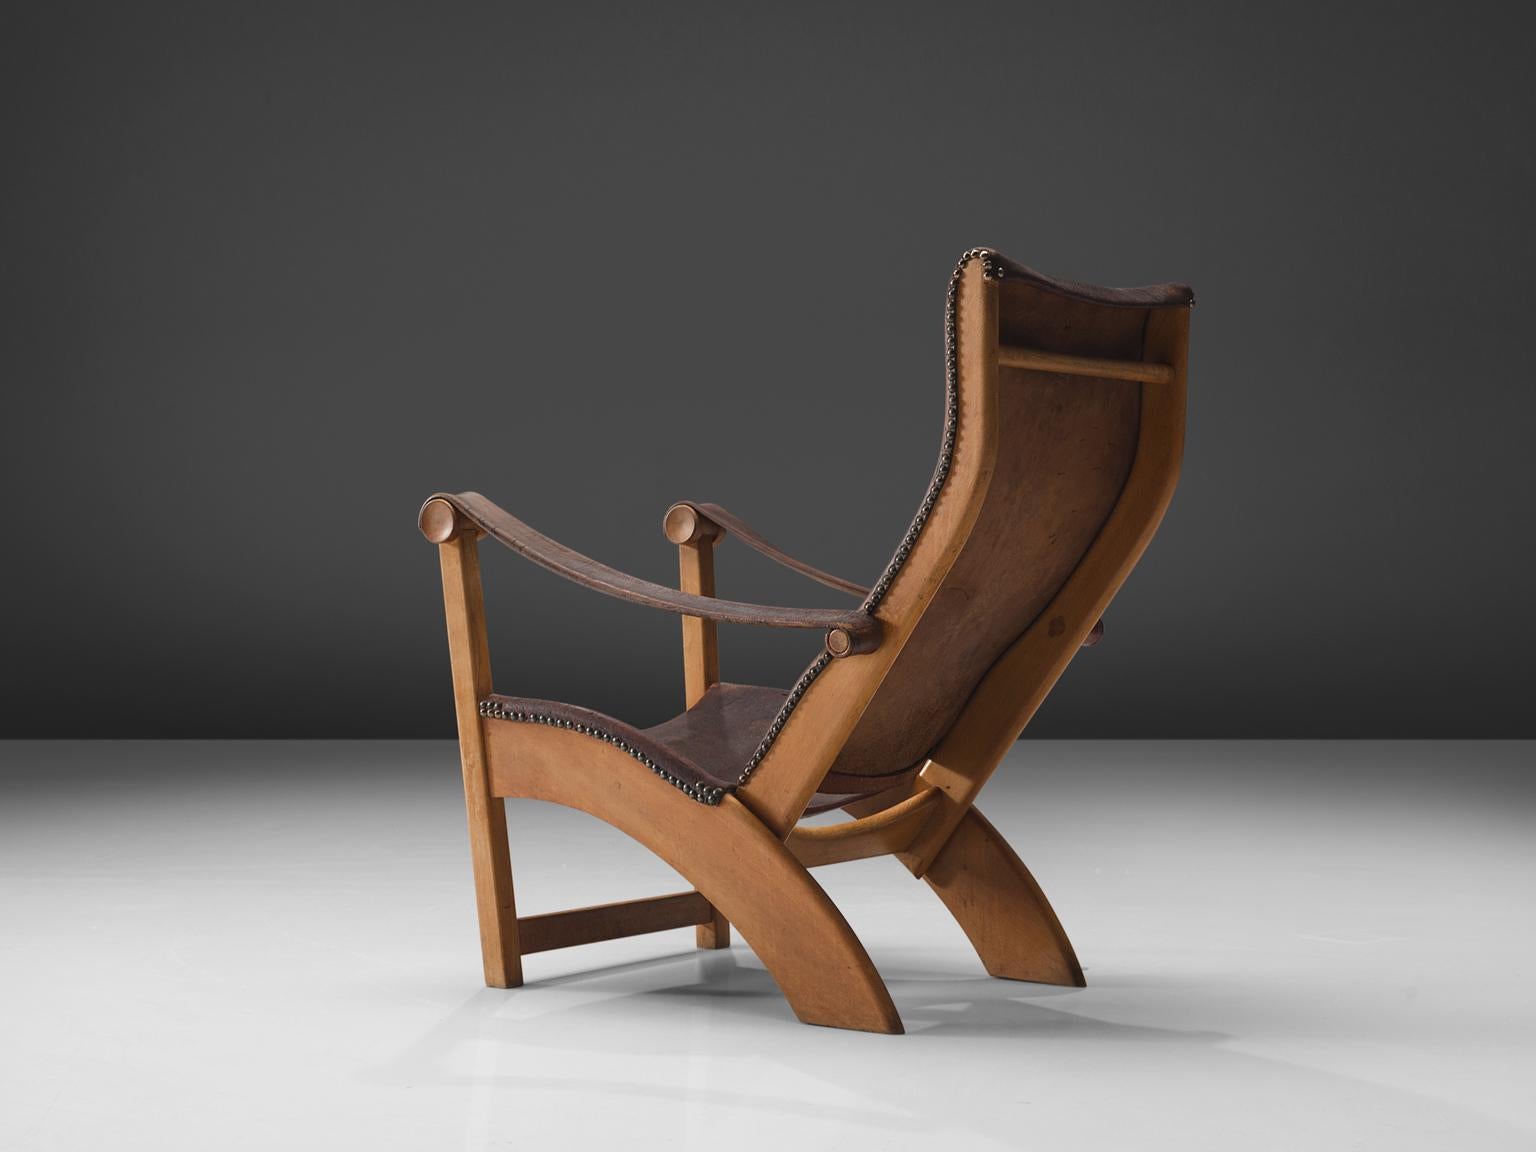 Mogens Voltelen for Niels Vodder, lounge chair model ‘Copenhagen', beech, leather, brass, Denmark, 1936

The ‘Copenhagen’ lounge chair was designed by Mogens Voltelen in 1936. The chair shows beautiful lines in the aged beech. Especially the